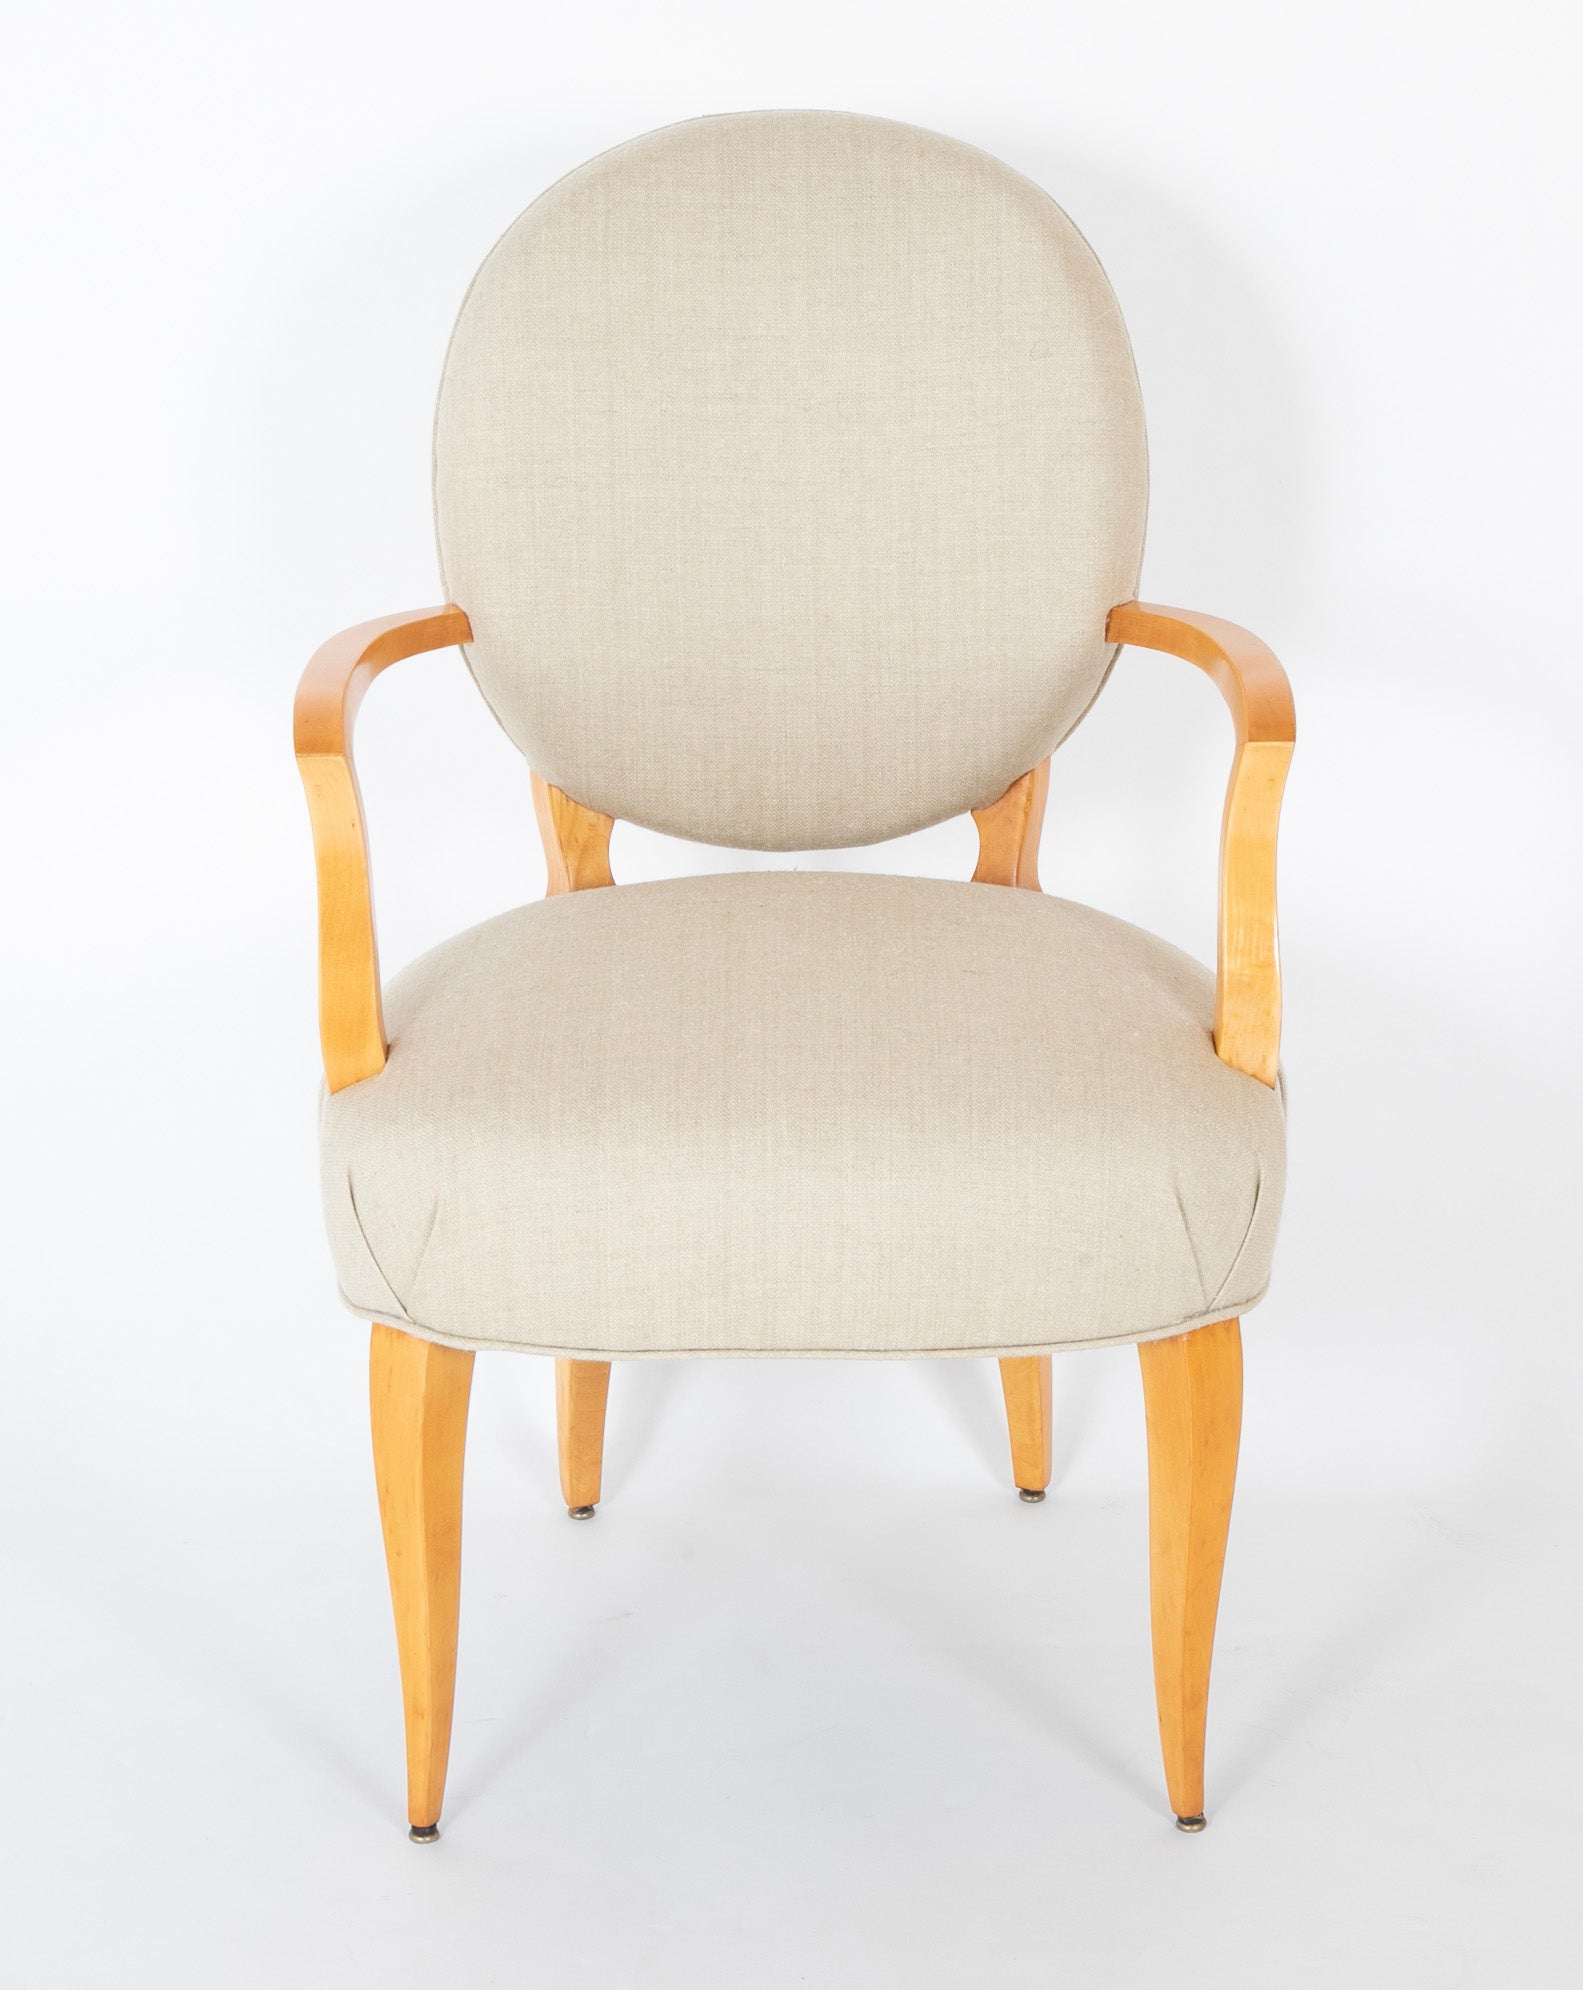 Pair of Sycamore Open Armchairs Attributed to Raphael Raffel